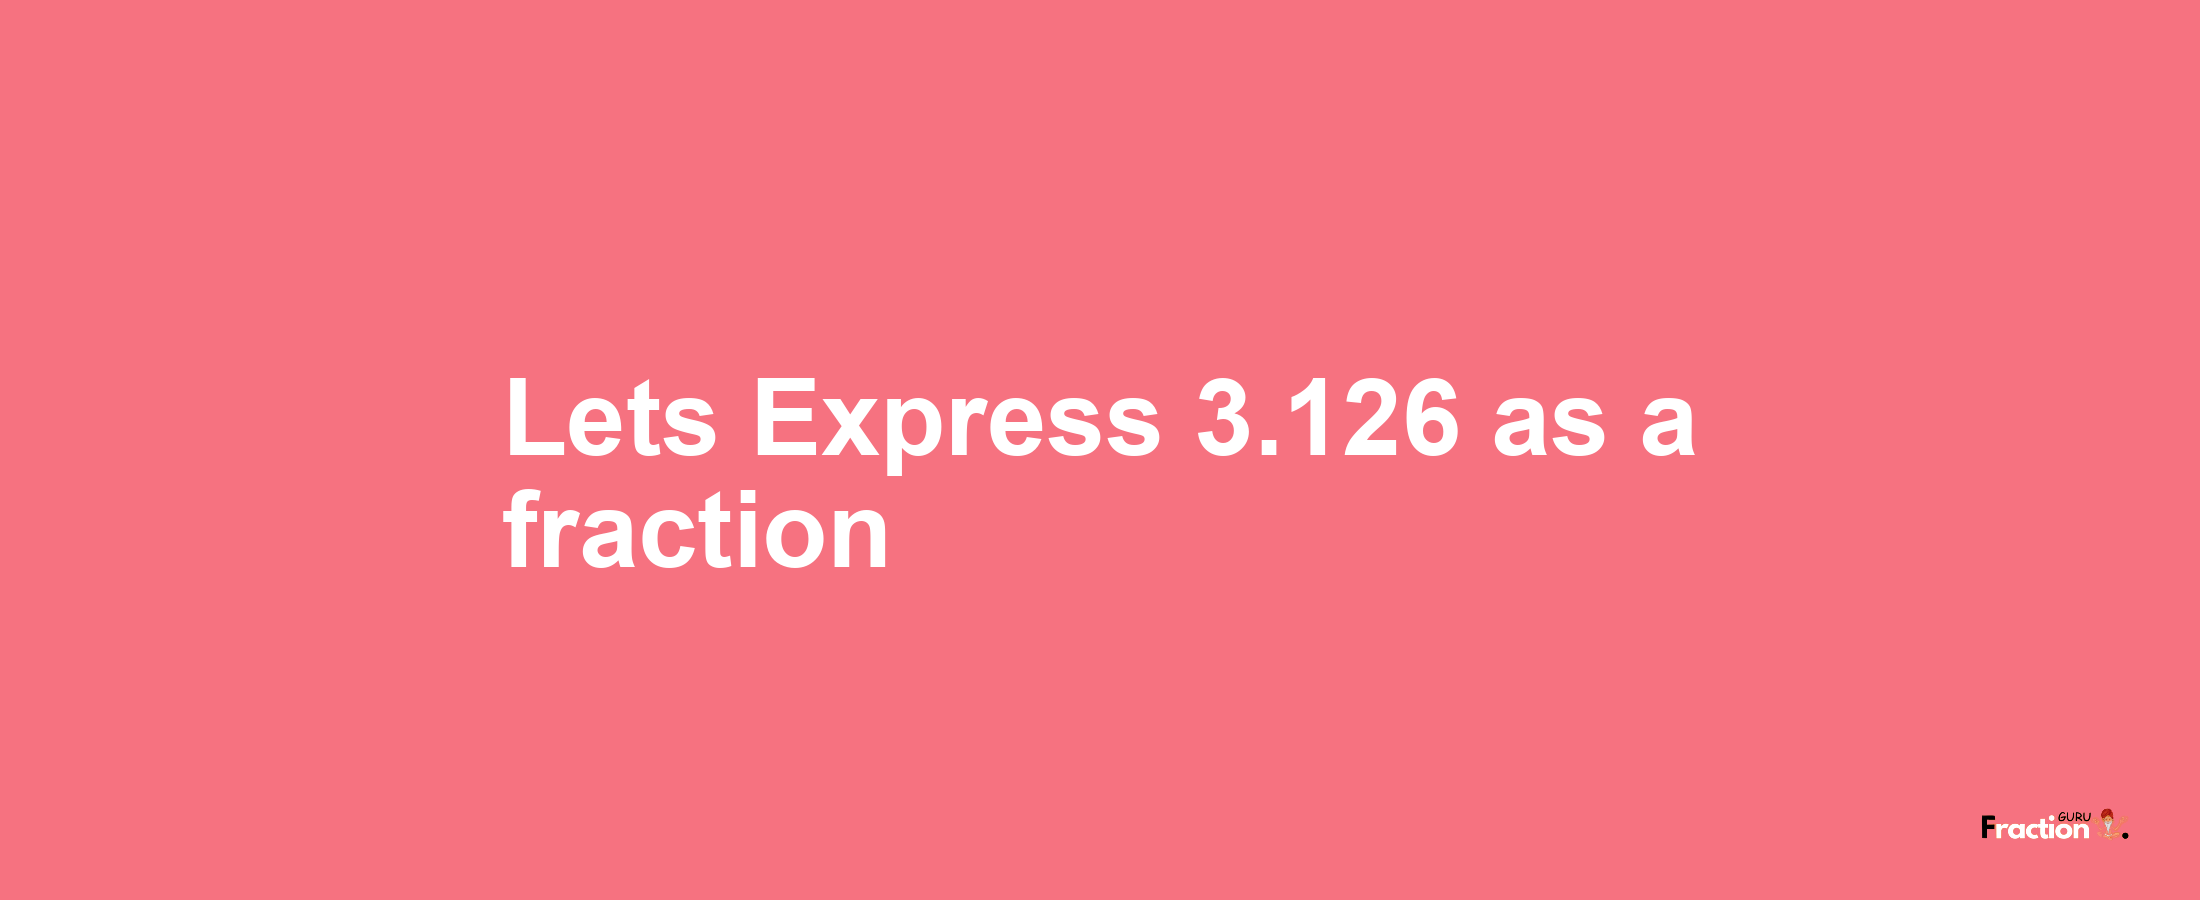 Lets Express 3.126 as afraction